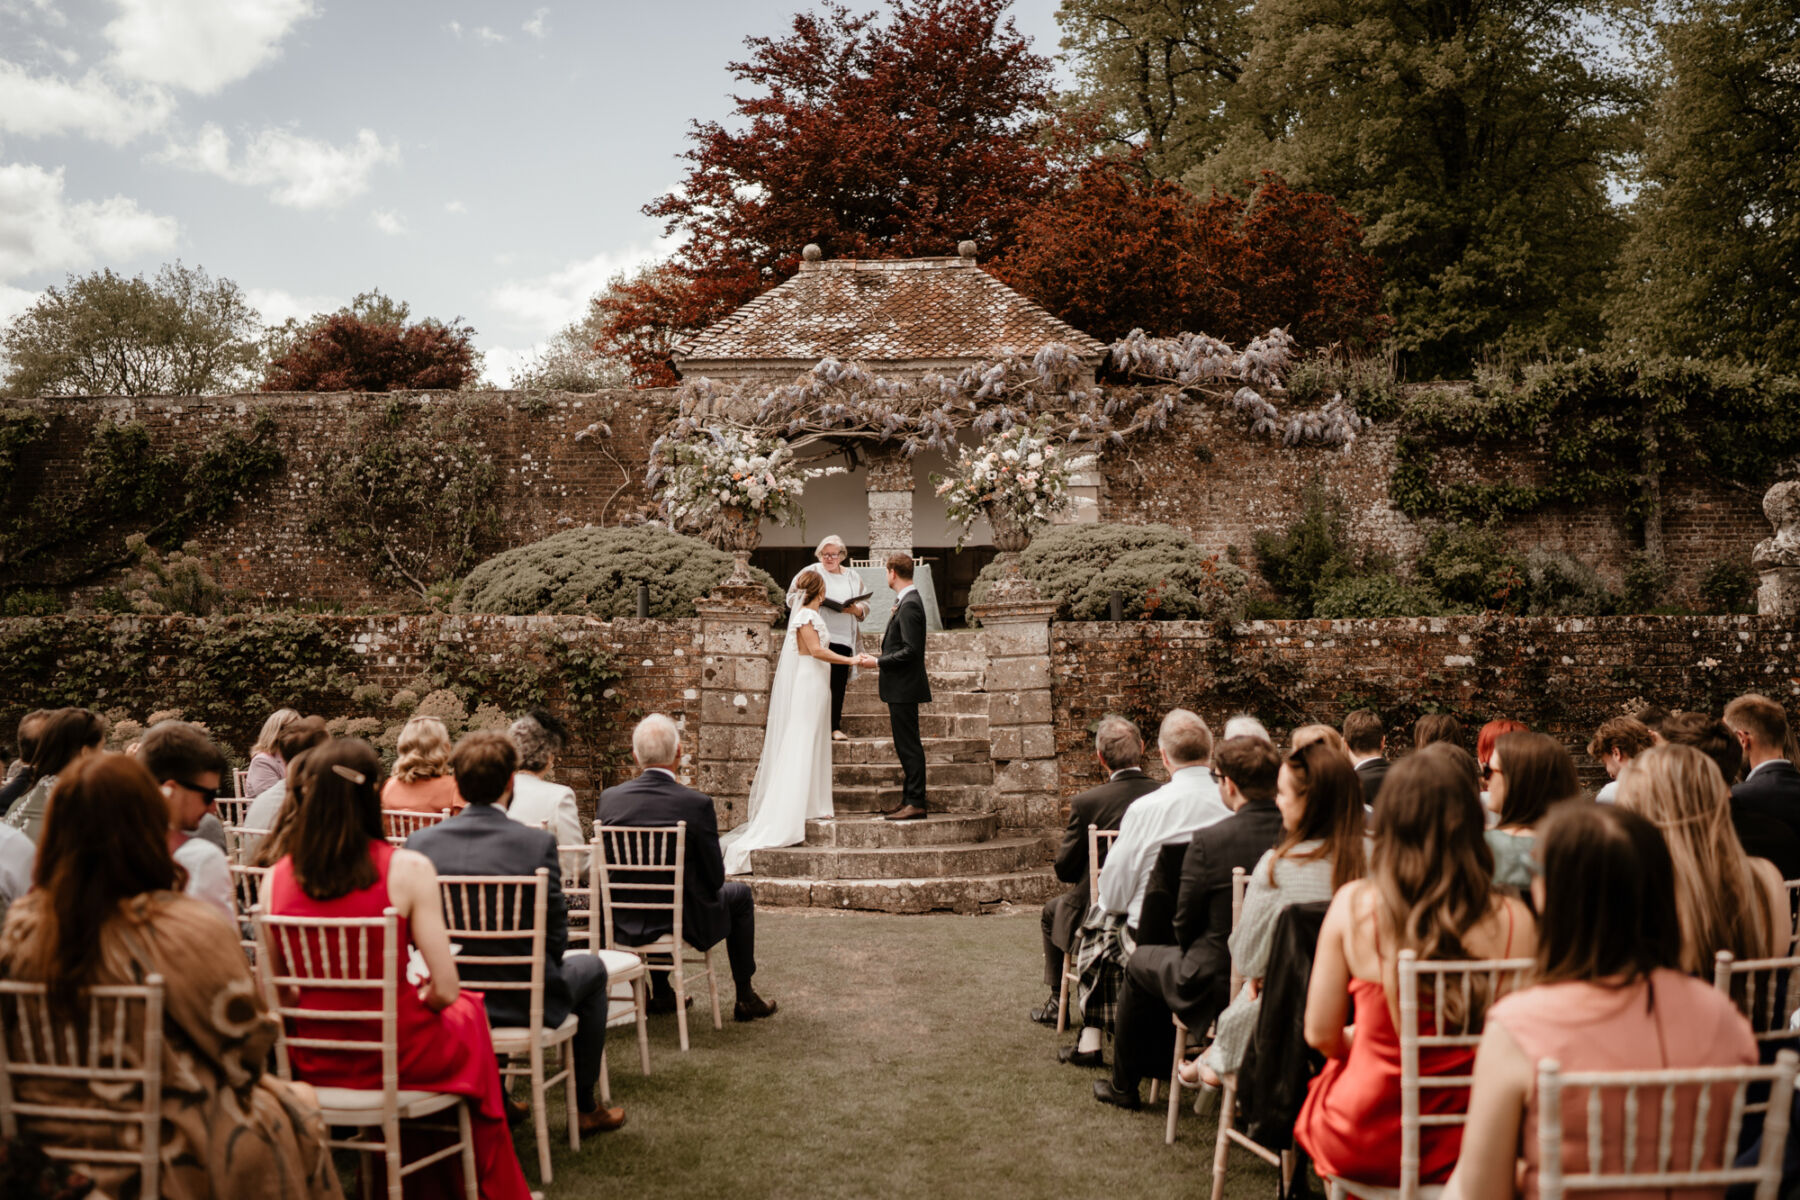 Bride and groom marrying outdoors in Wiltshire